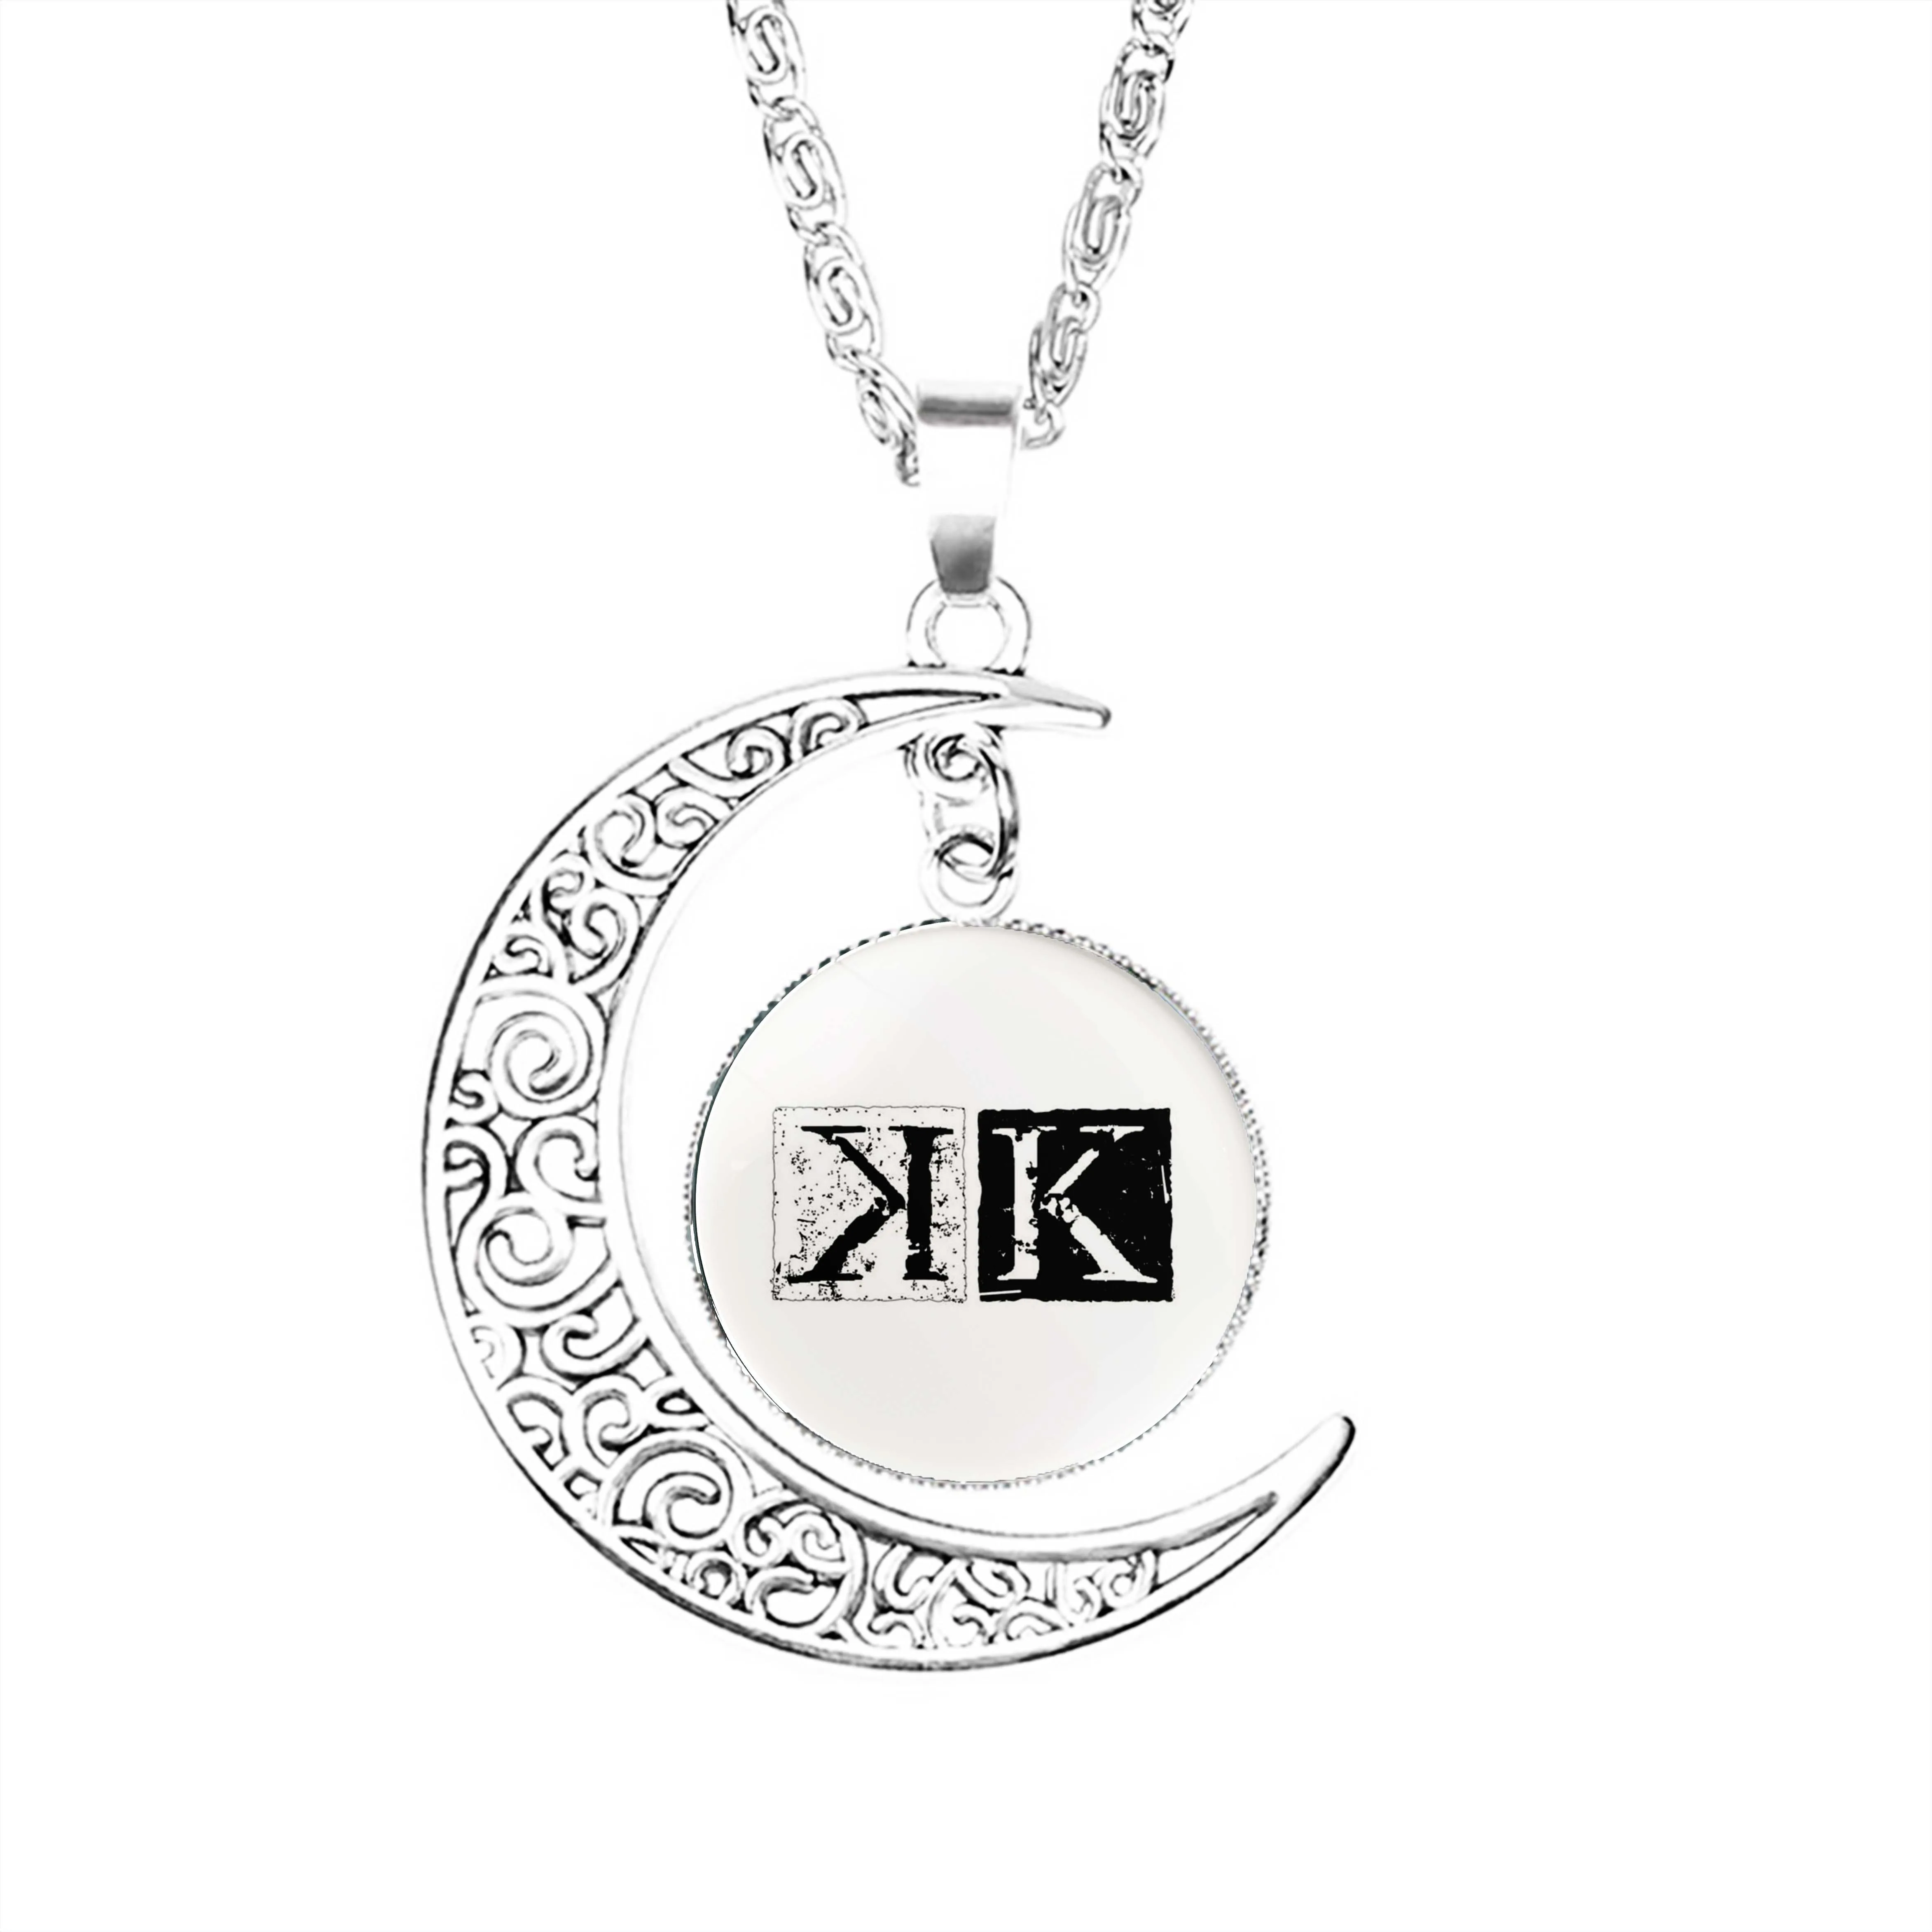 

K Project Logo Moon Necklace Fashion Jewelry Pendant Glass Charm Gifts Lovers Men Jewelry Boy Chain Crescent Girls Lady Dome